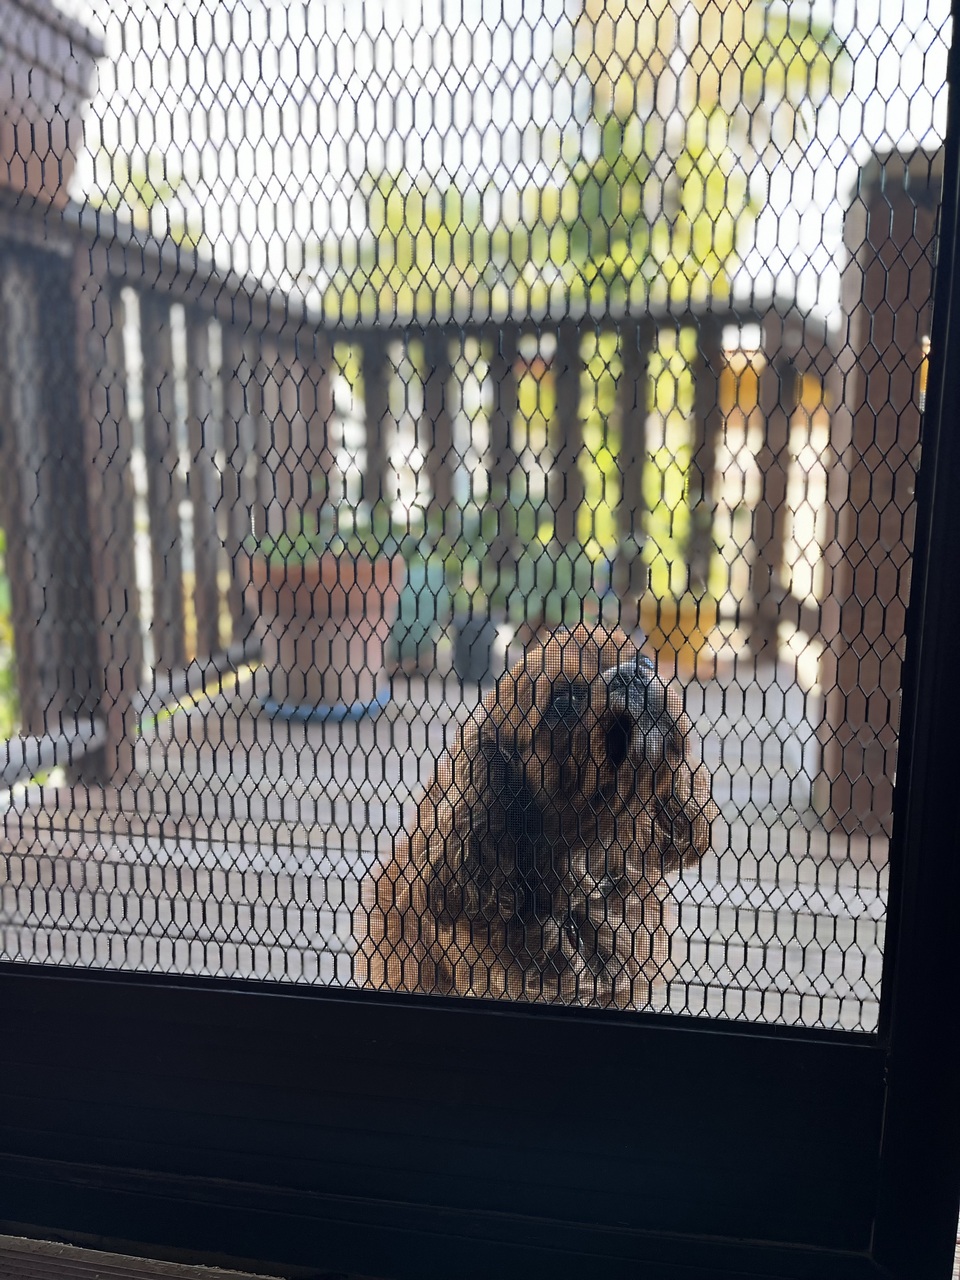 “Pweaseee can I come in? 🥺” - Rusty